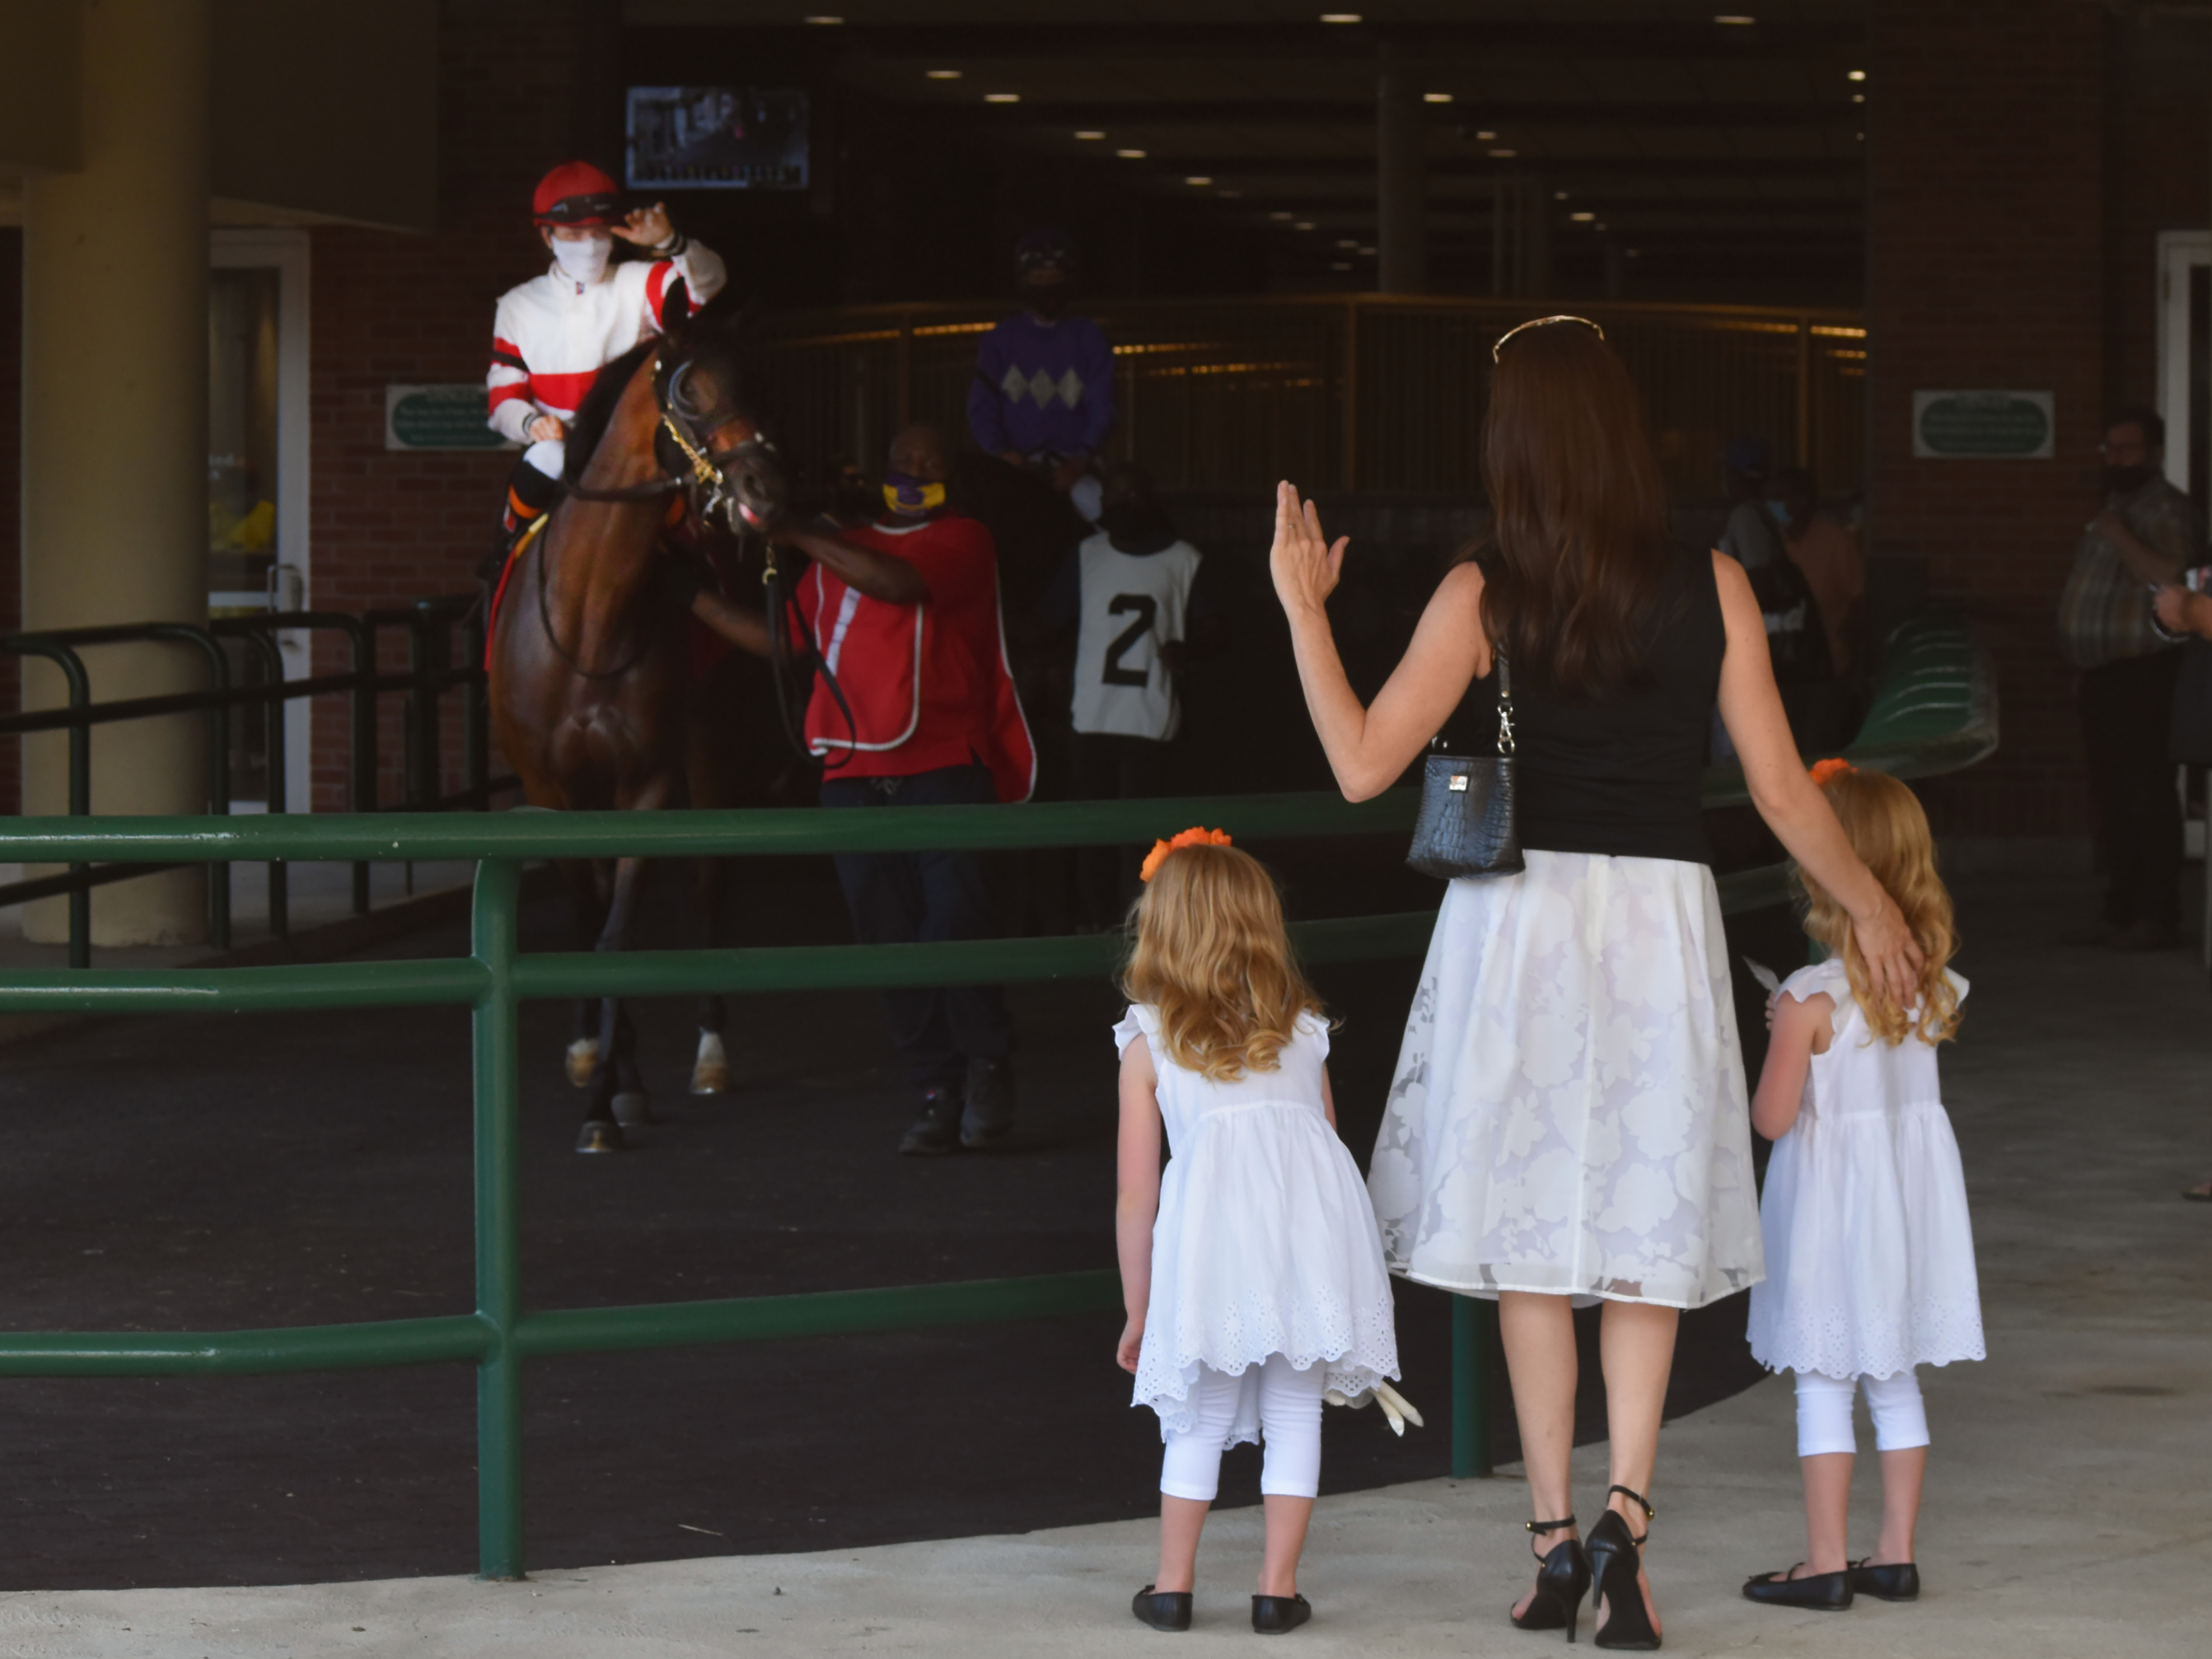 Jockey Emma-Jayne Wilson takes a moment to greet her wife Laura Claire Trotter and their daughters Grace and Avery, heading to post parade. A warm welcome back after a year of no spectators at Woodbin